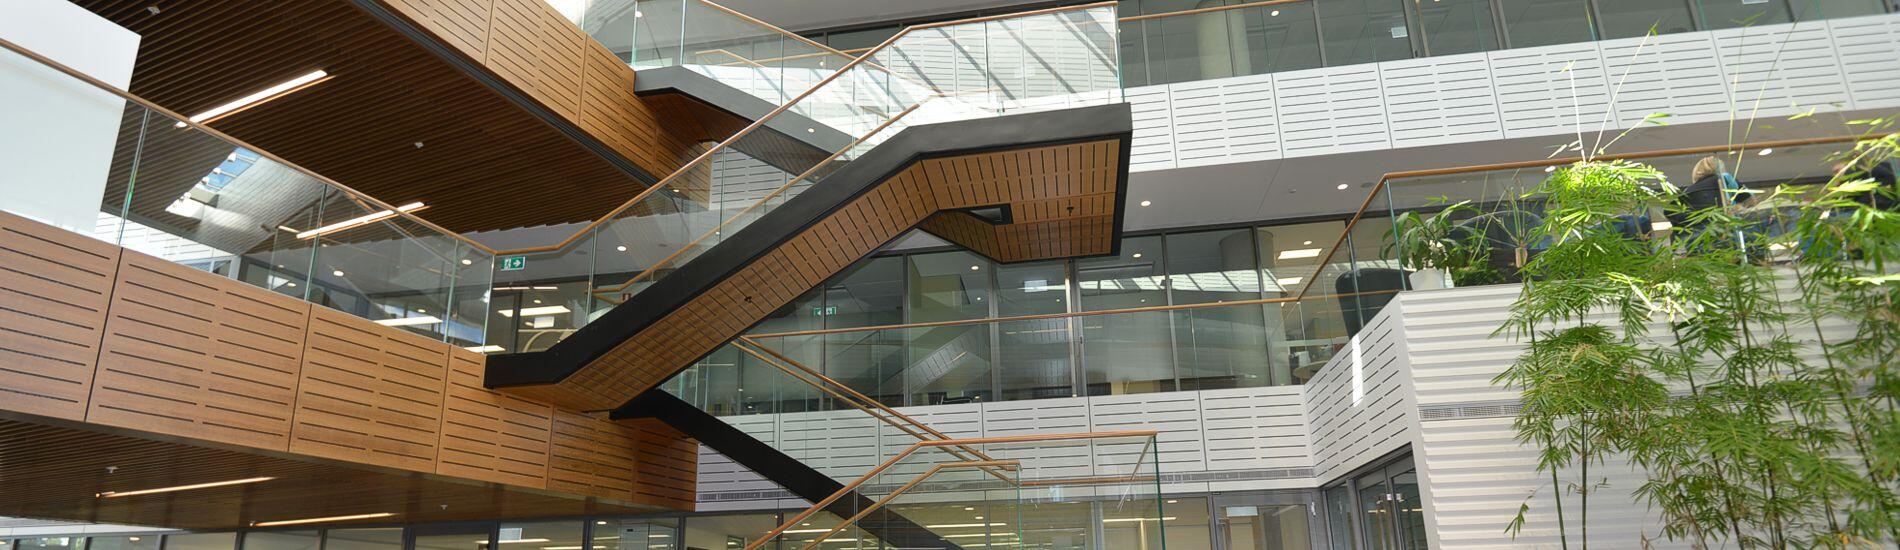 Mix of SUPAWOOD Acoustic and Slatted Lining Products Used Extensively in Atrium of Commercial Building